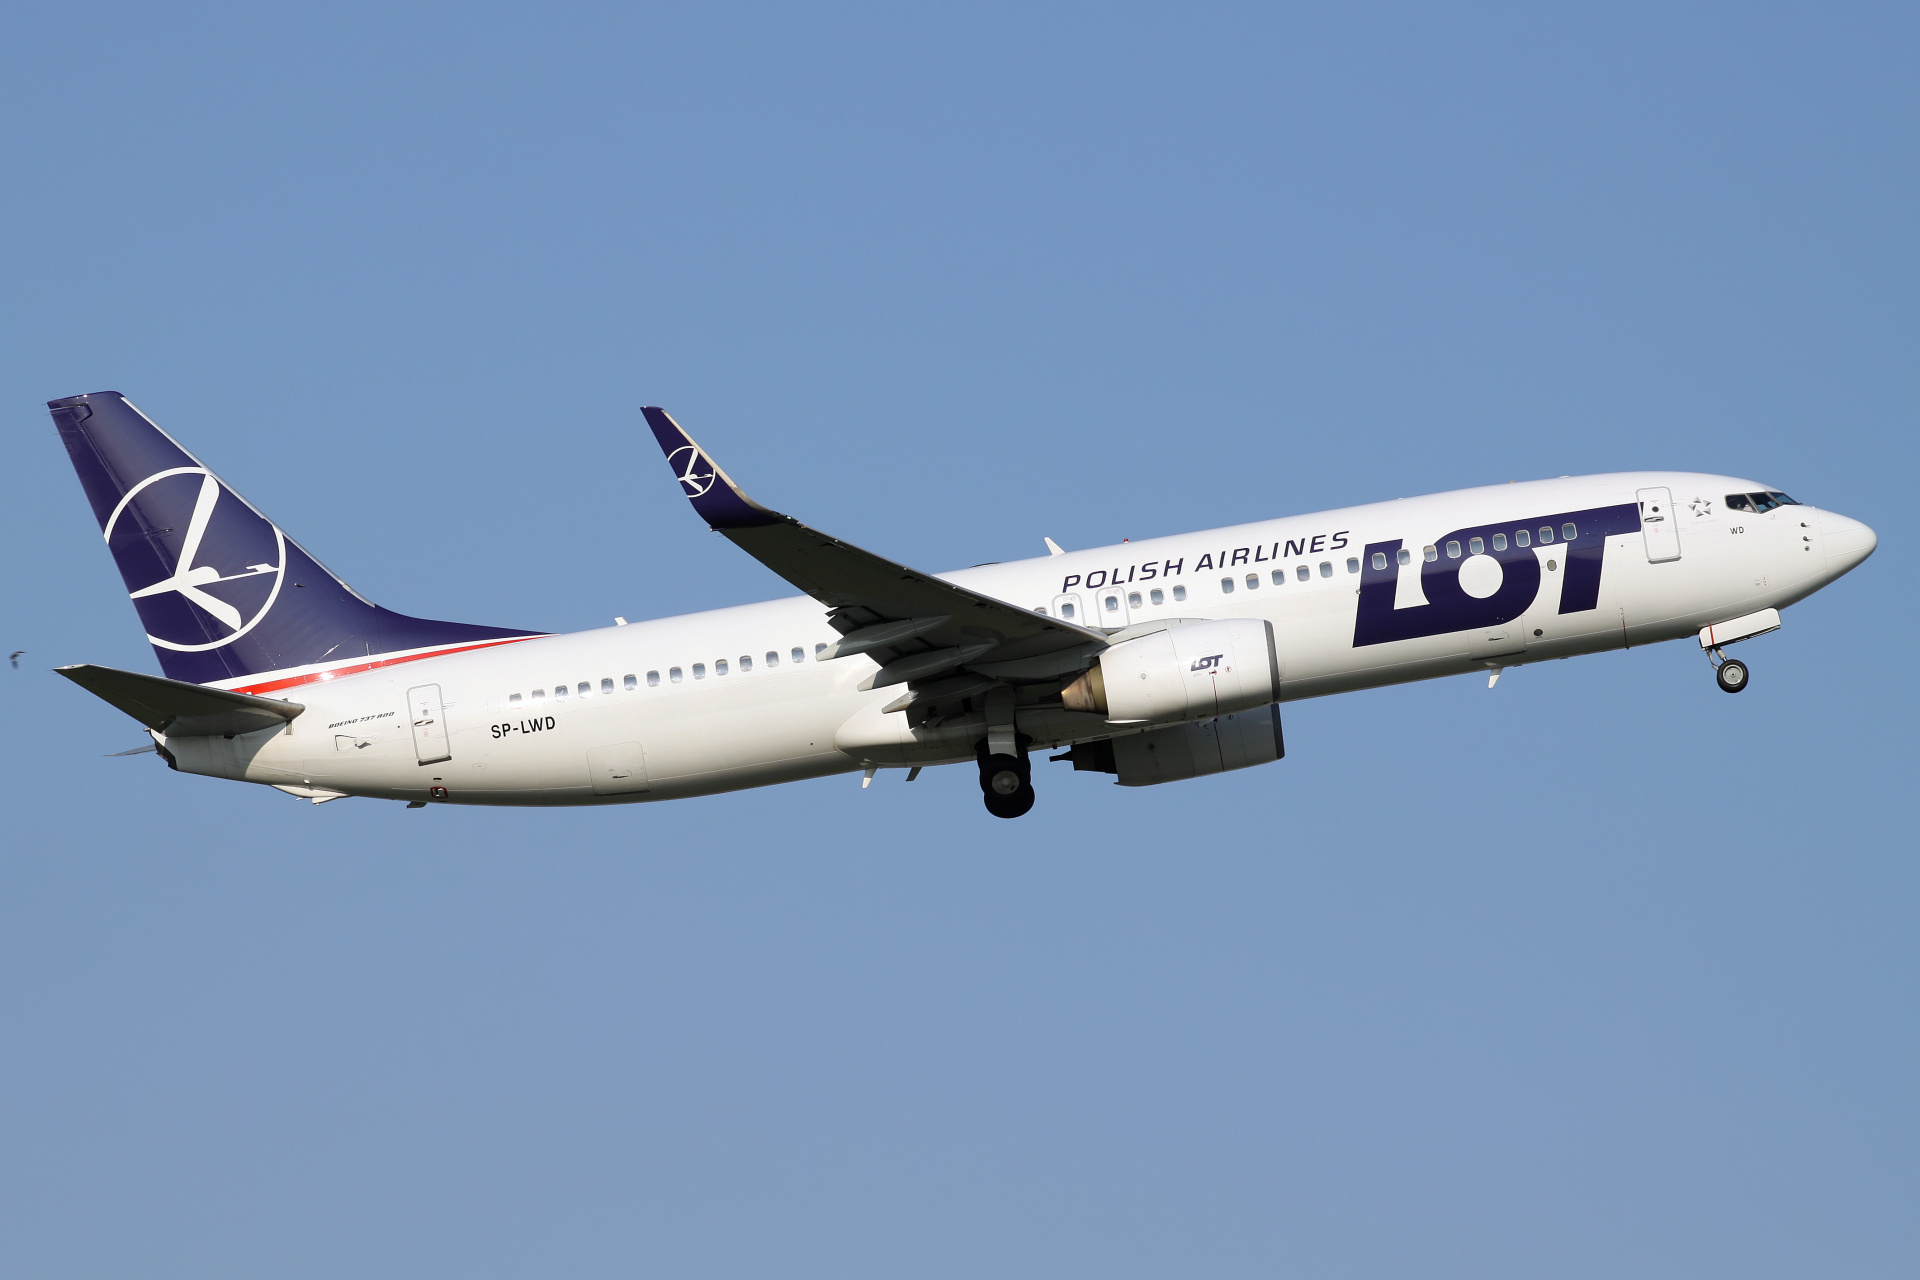 SP-LWD (Aircraft » EPWA Spotting » Boeing 737-800 » LOT Polish Airlines)